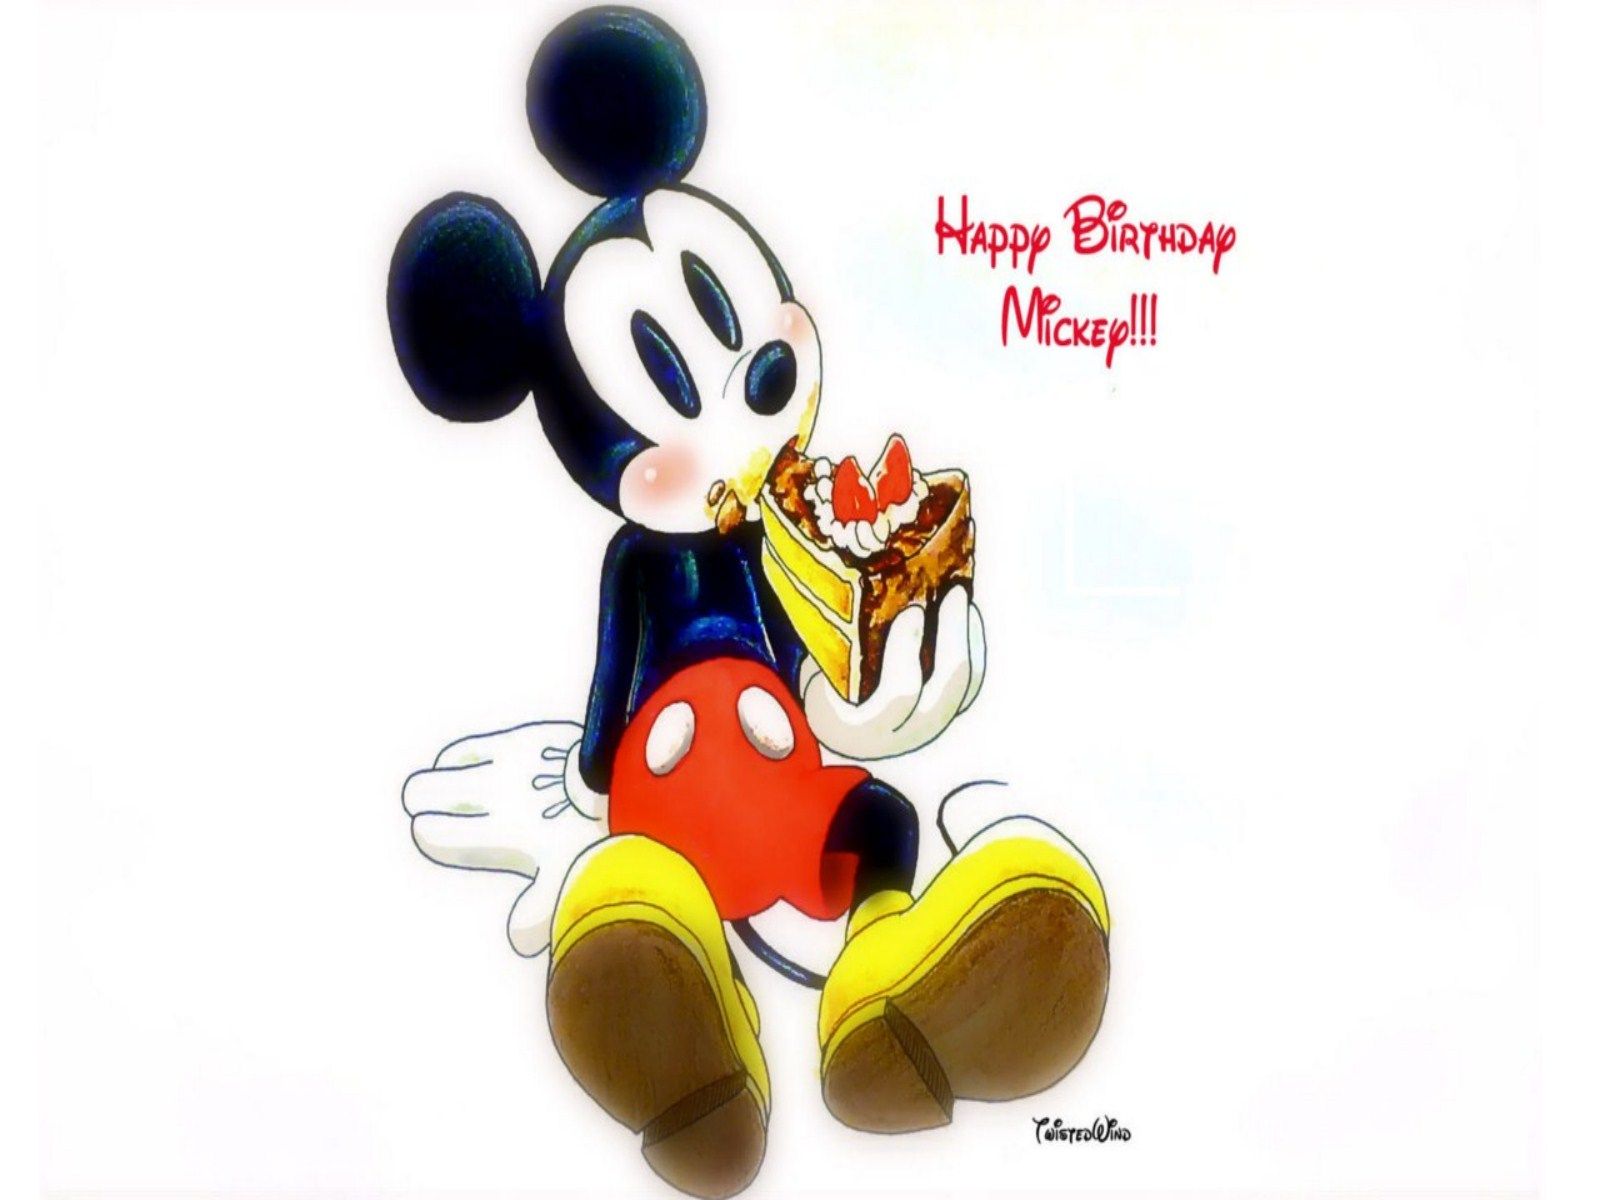 Mickey Mouse Birthday Wallpaper. Mickey mouse wallpaper, Mickey mouse and friends, Mickey